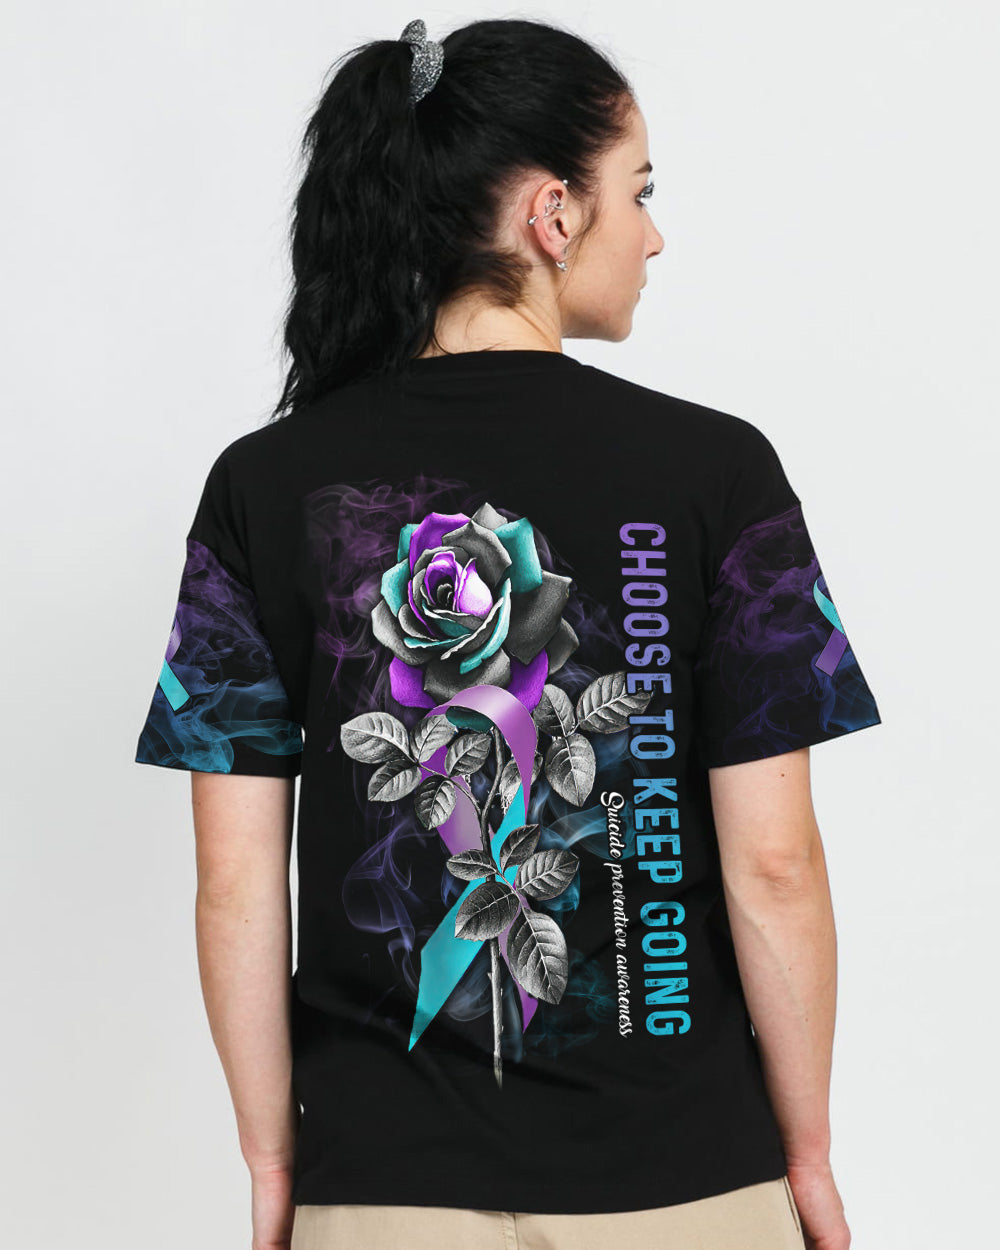 Choose To Keep Going Rose Smoke Women's Suicide Prevention Awareness Tshirt